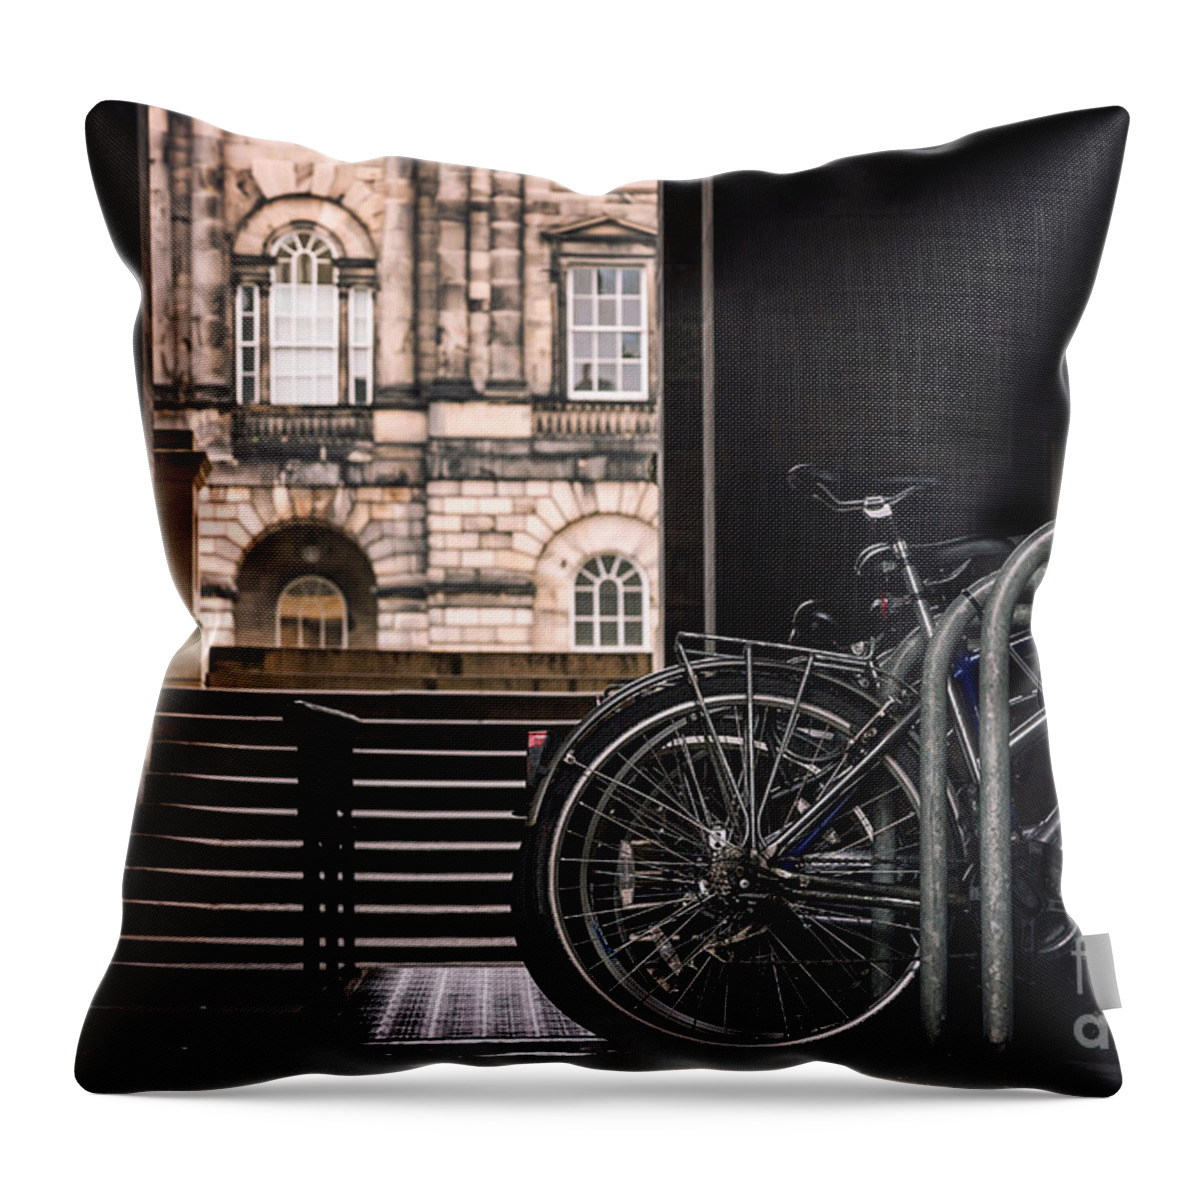 University Throw Pillow featuring the photograph Bikes and University by Jane Rix